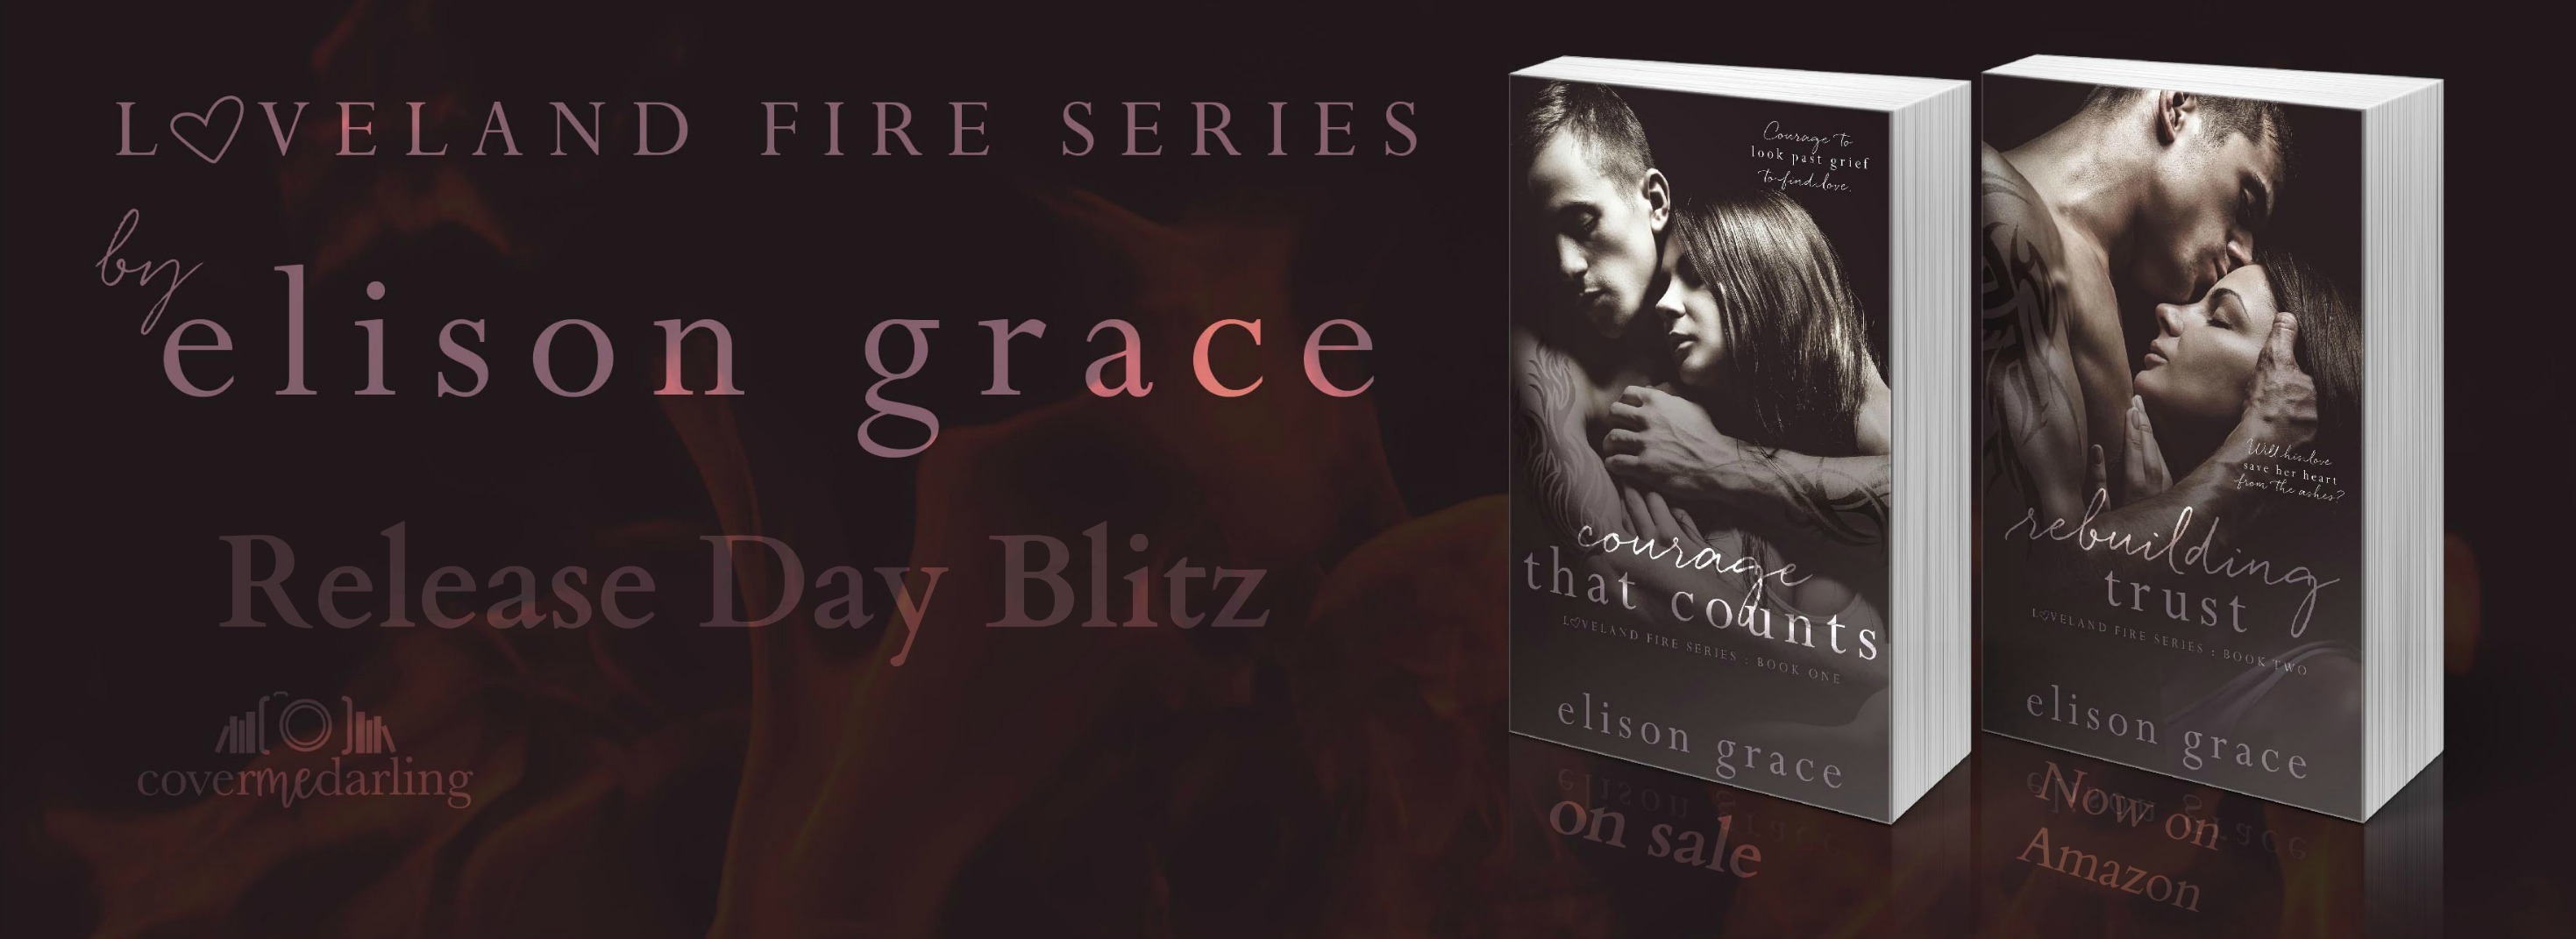 Rebuilding Trust by Elison Grace Release Day and giveaway